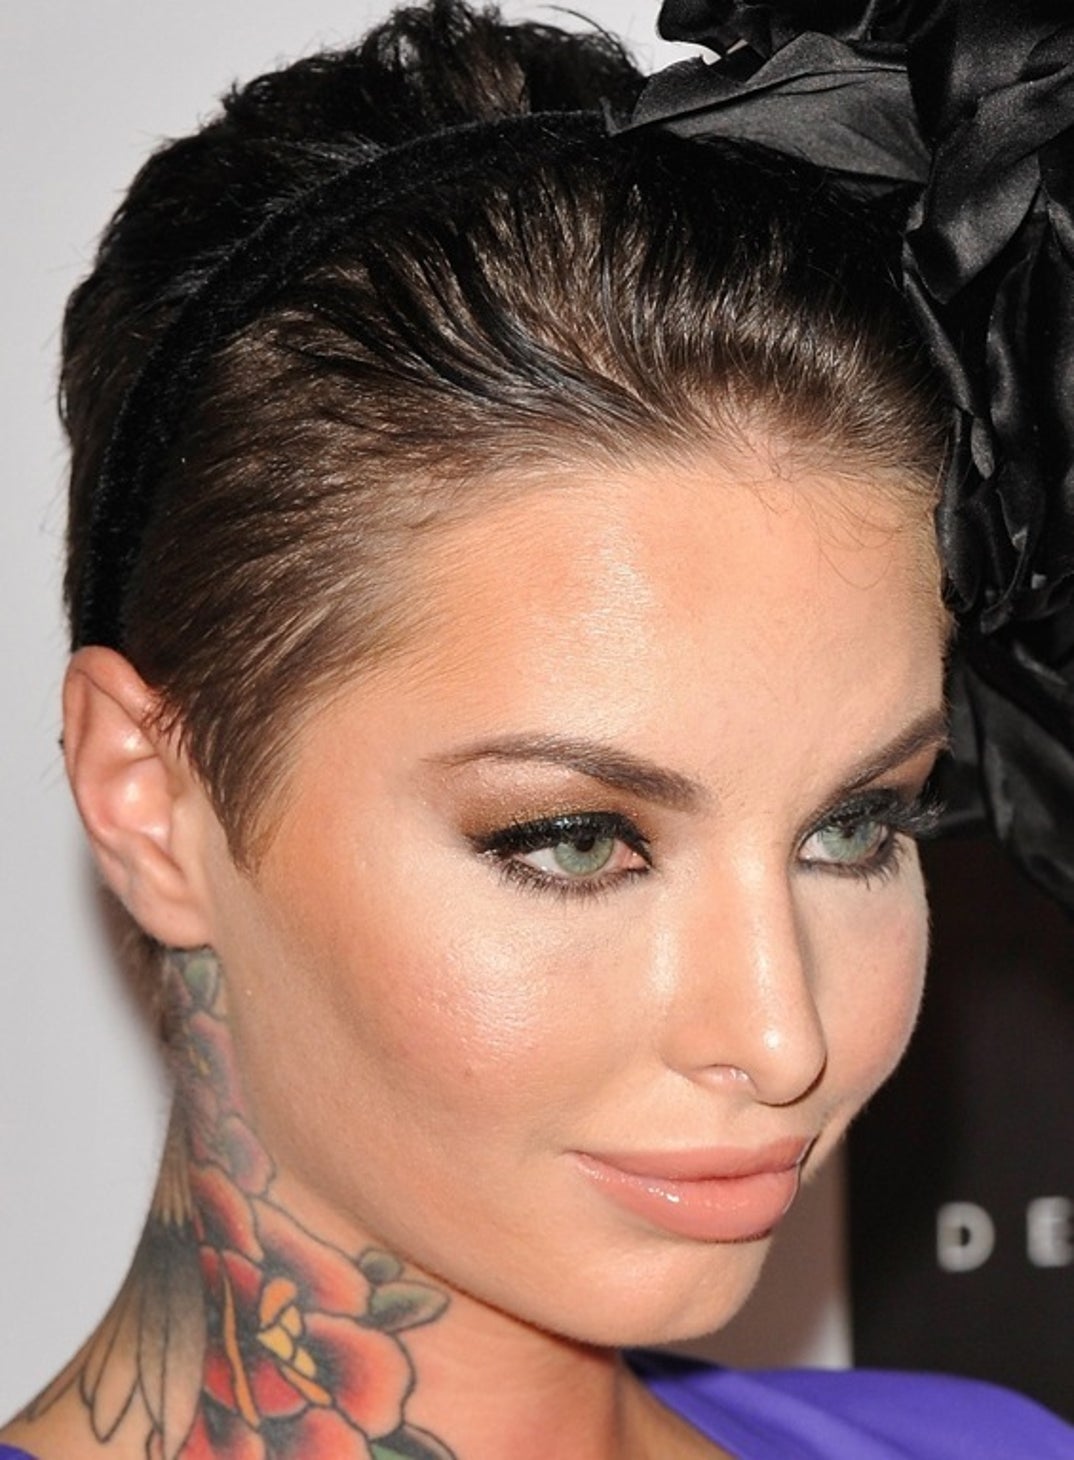 donn walck recommends christy mack hair pic